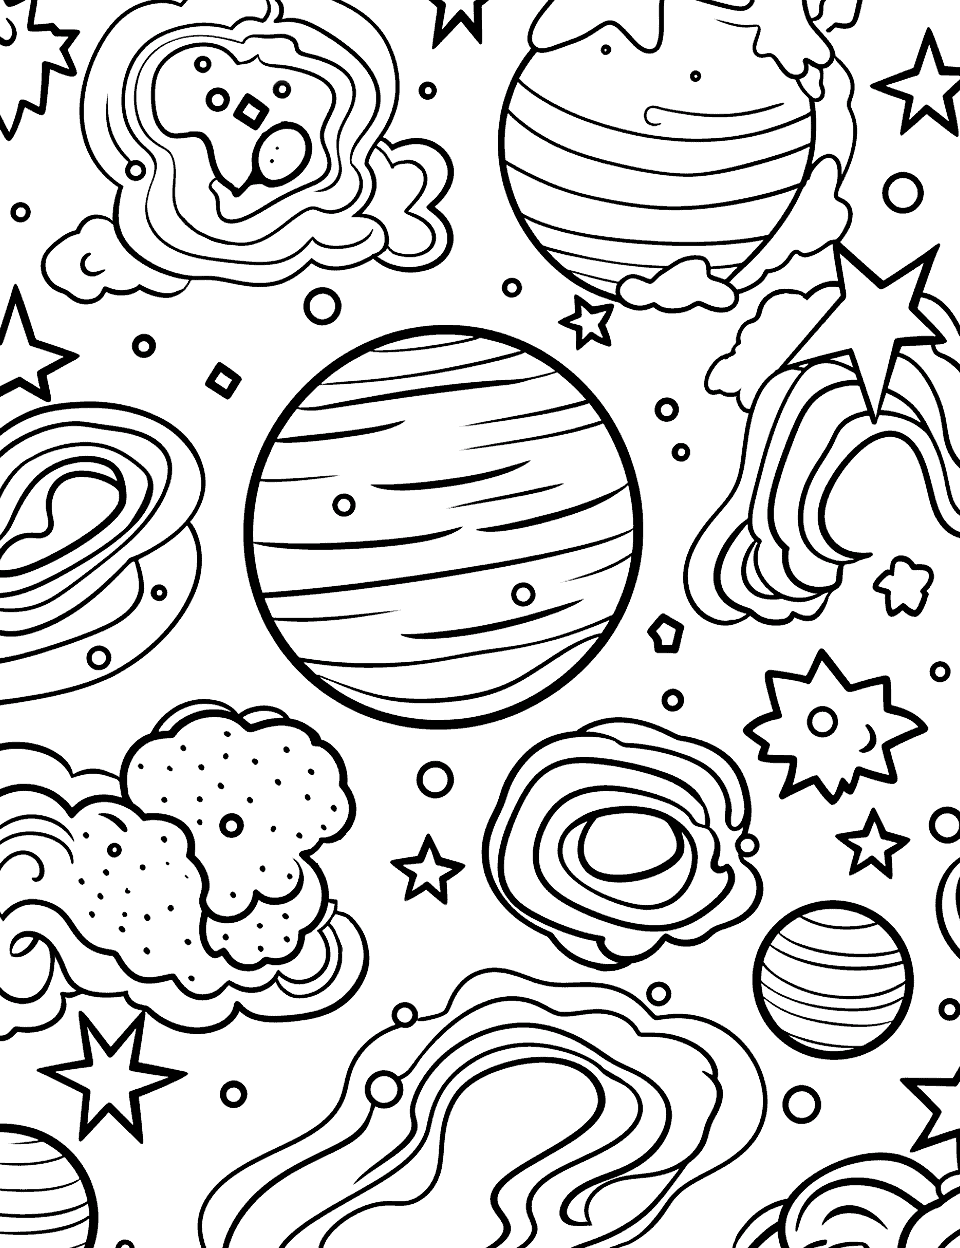 Galaxy Patterns Adult Coloring Page - An adult coloring page featuring stars, planets, and swirling galaxies.